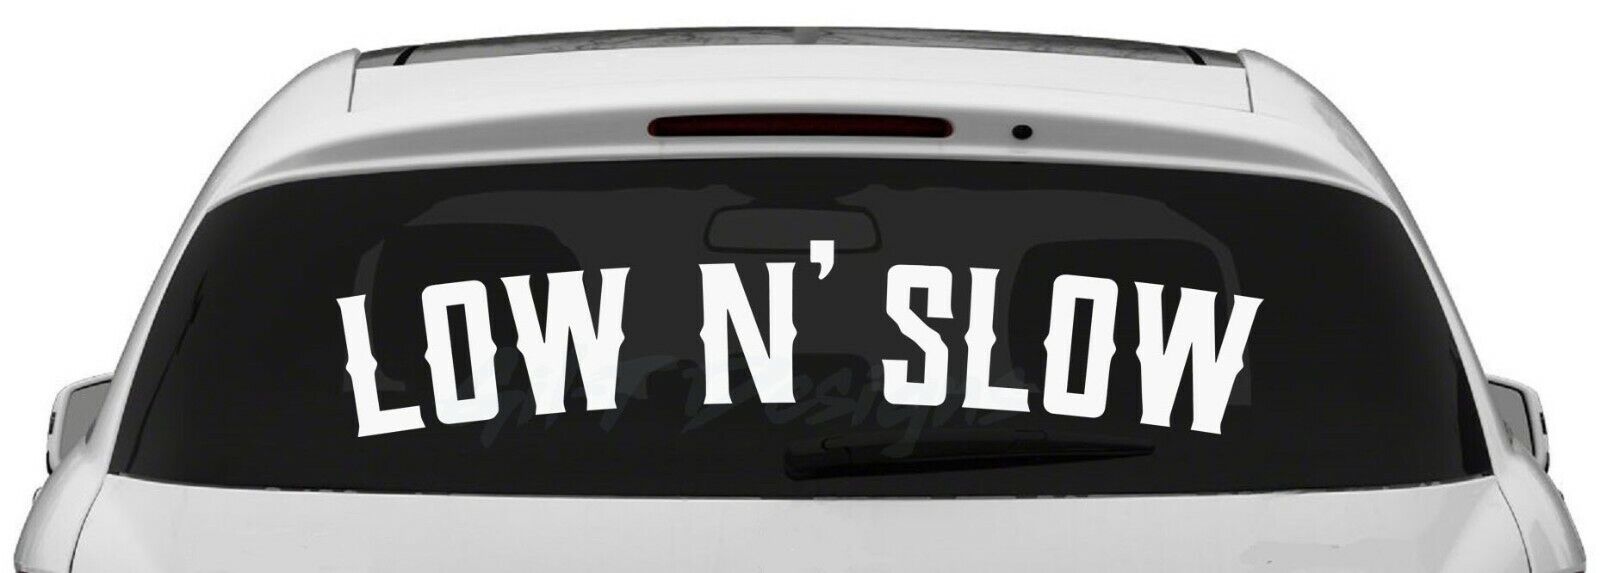 Low n' Slow Vinyl Decal Sticker, Lowered, Lowrider, Aircooled, Low and Slow